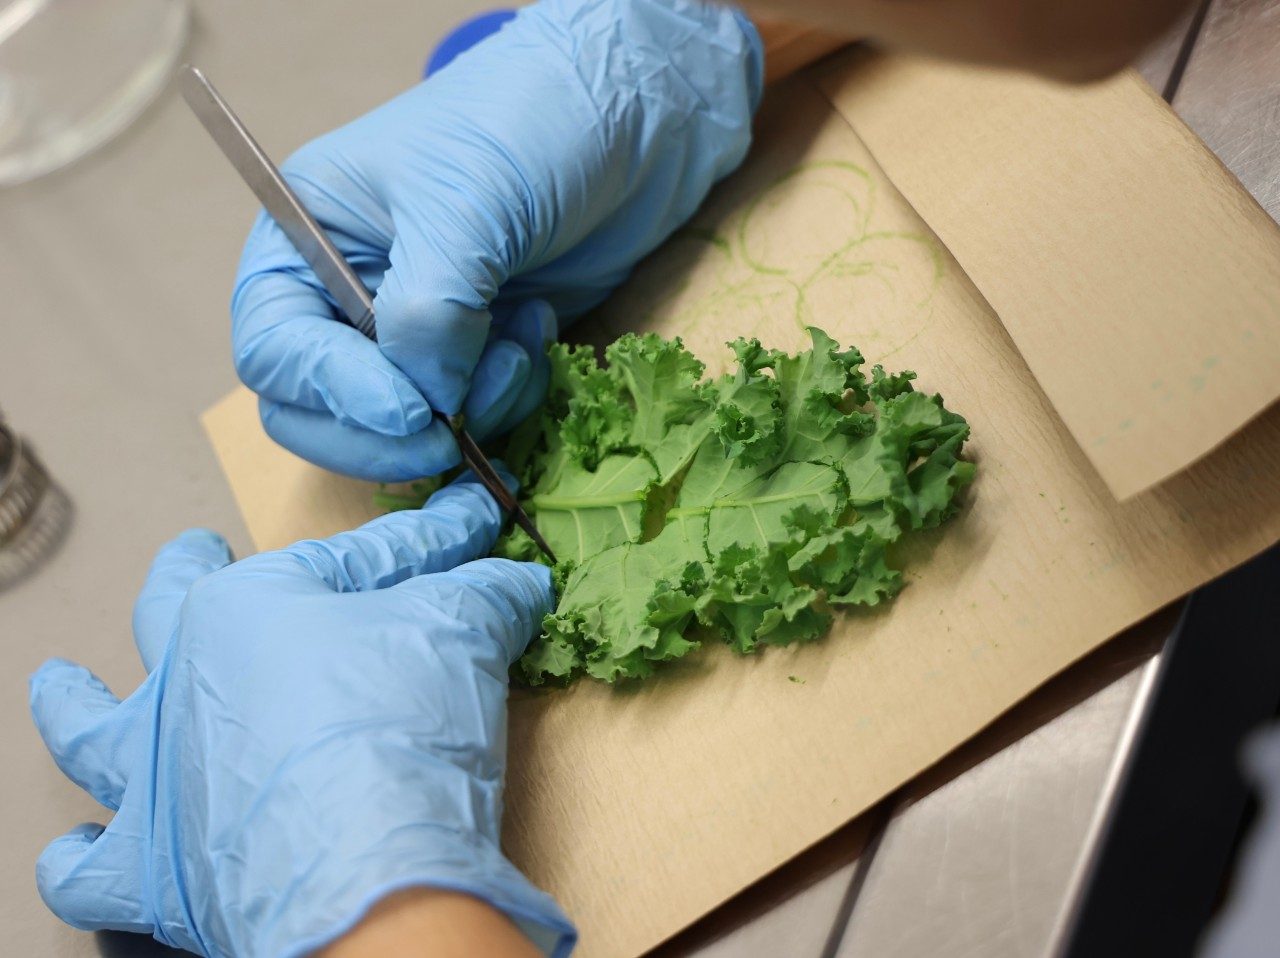 Researcher removes sections of kale for a pathogenicity study